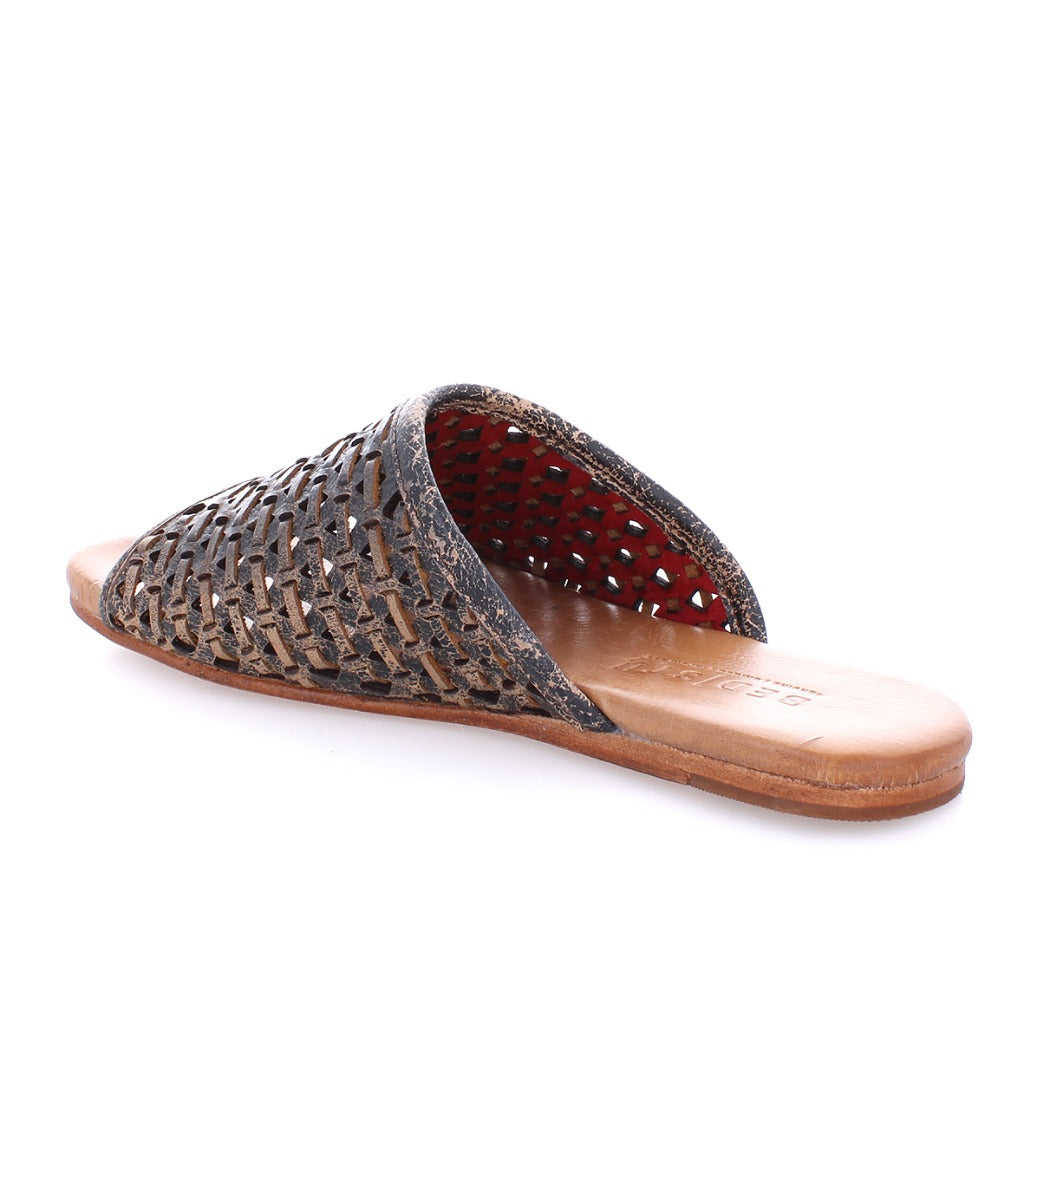 A women's woven slipper with a brown leather sole, the Minerva slipper by Bed Stu.